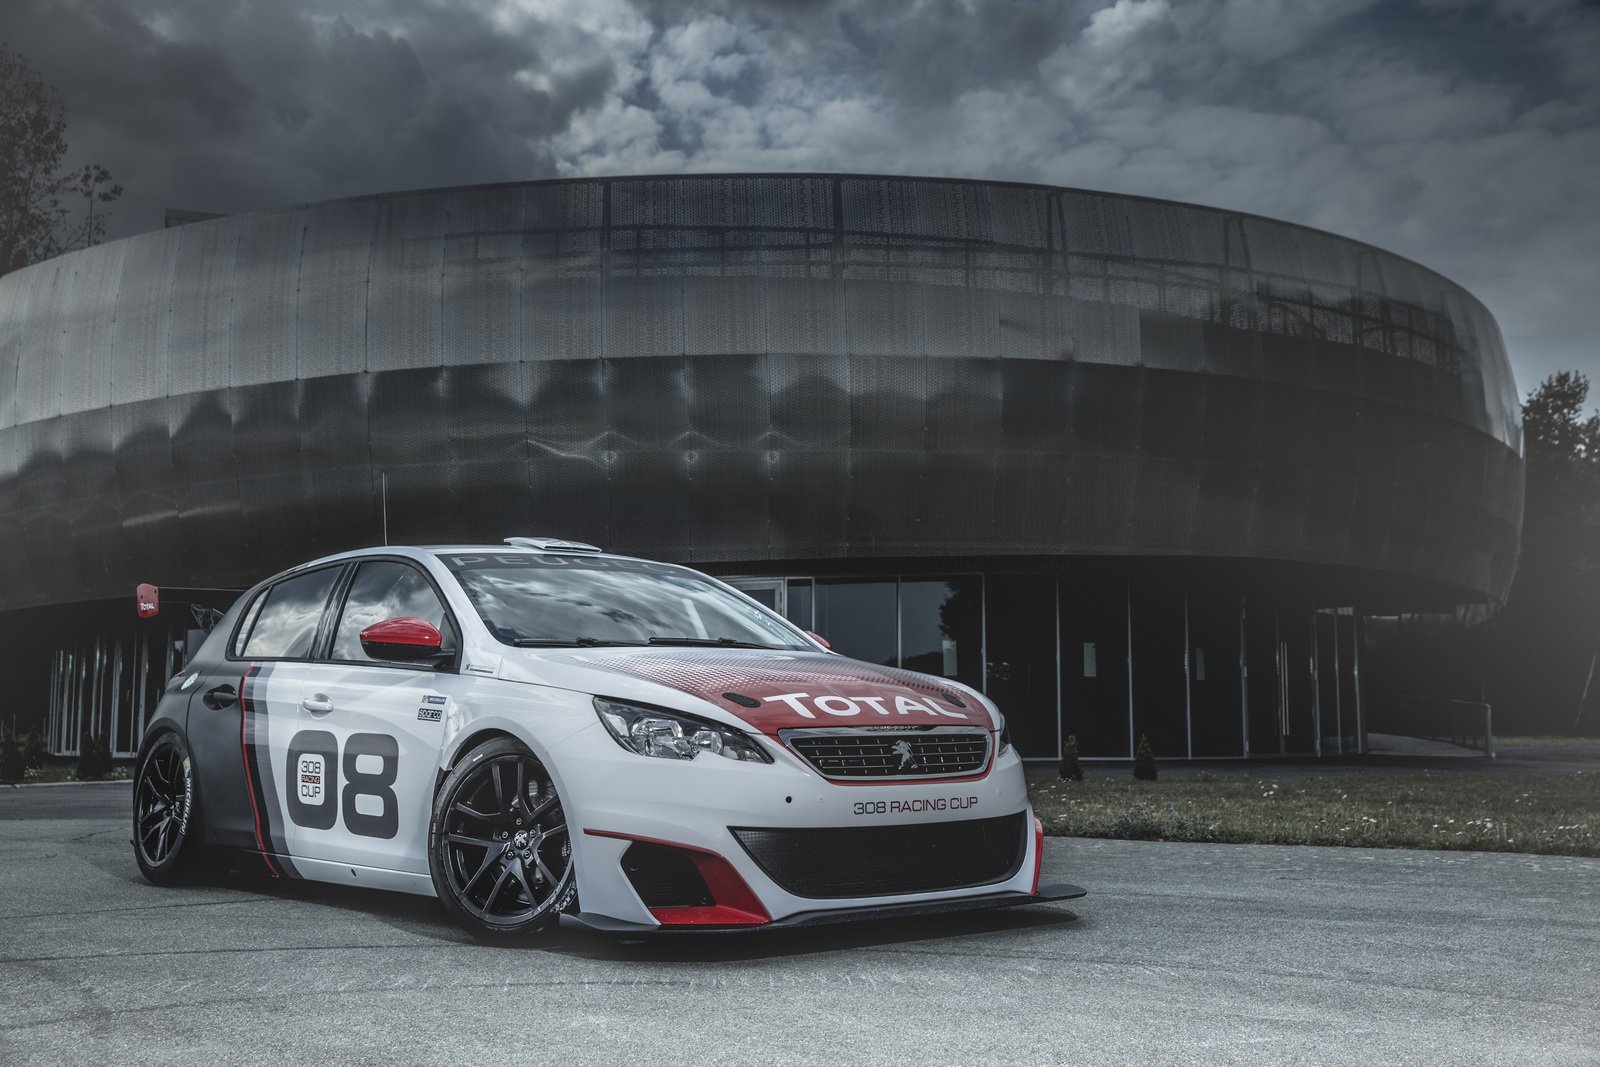 peugeot, 308, Racing, Cup, Cars, 2016, French Wallpaper